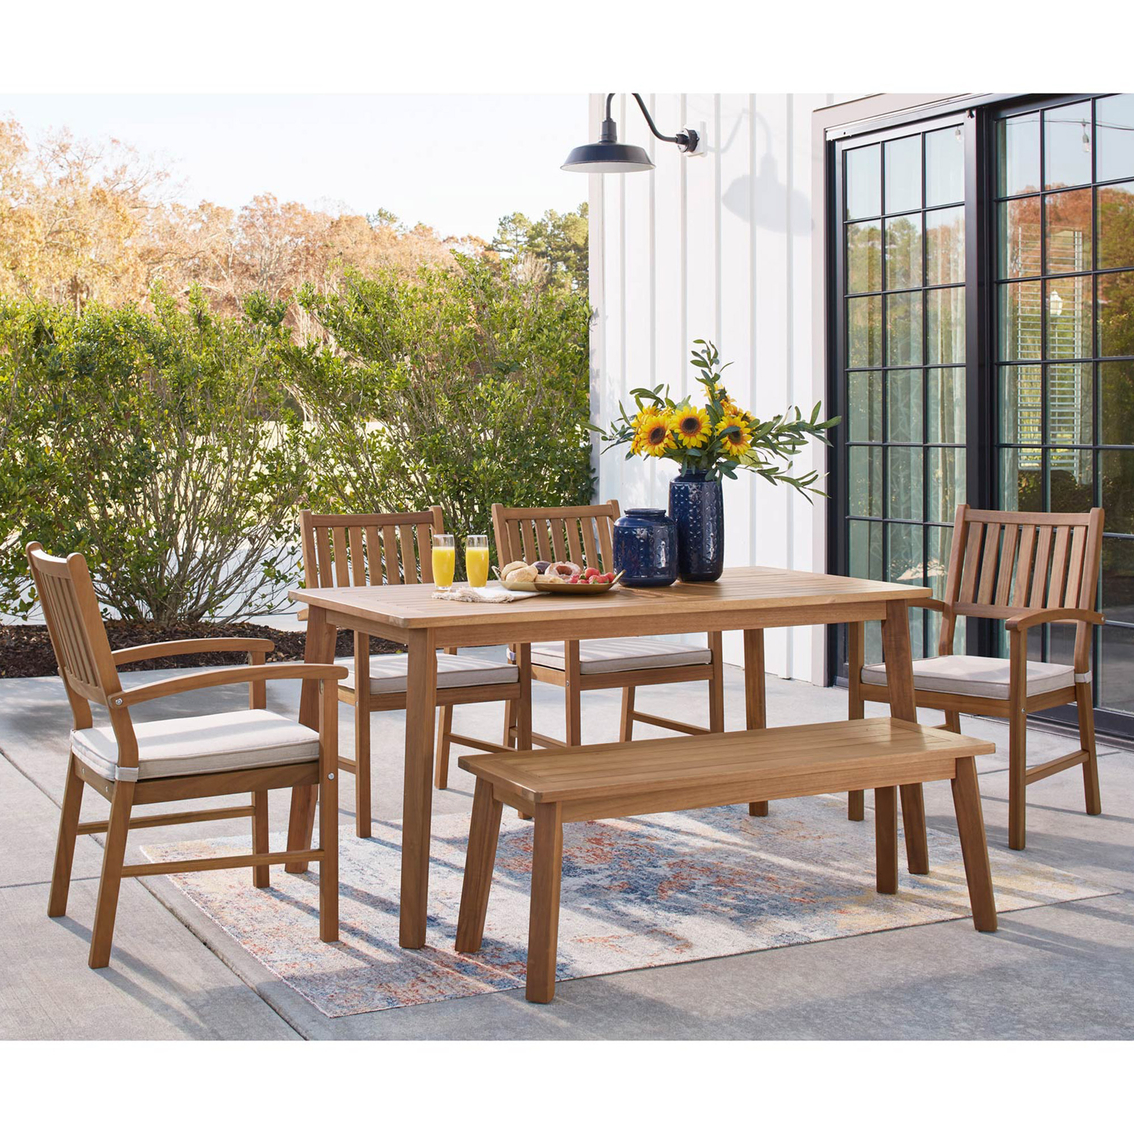 Signature Design by Ashley Janiyah Outdoor Rectangular Dining Table - Image 5 of 6